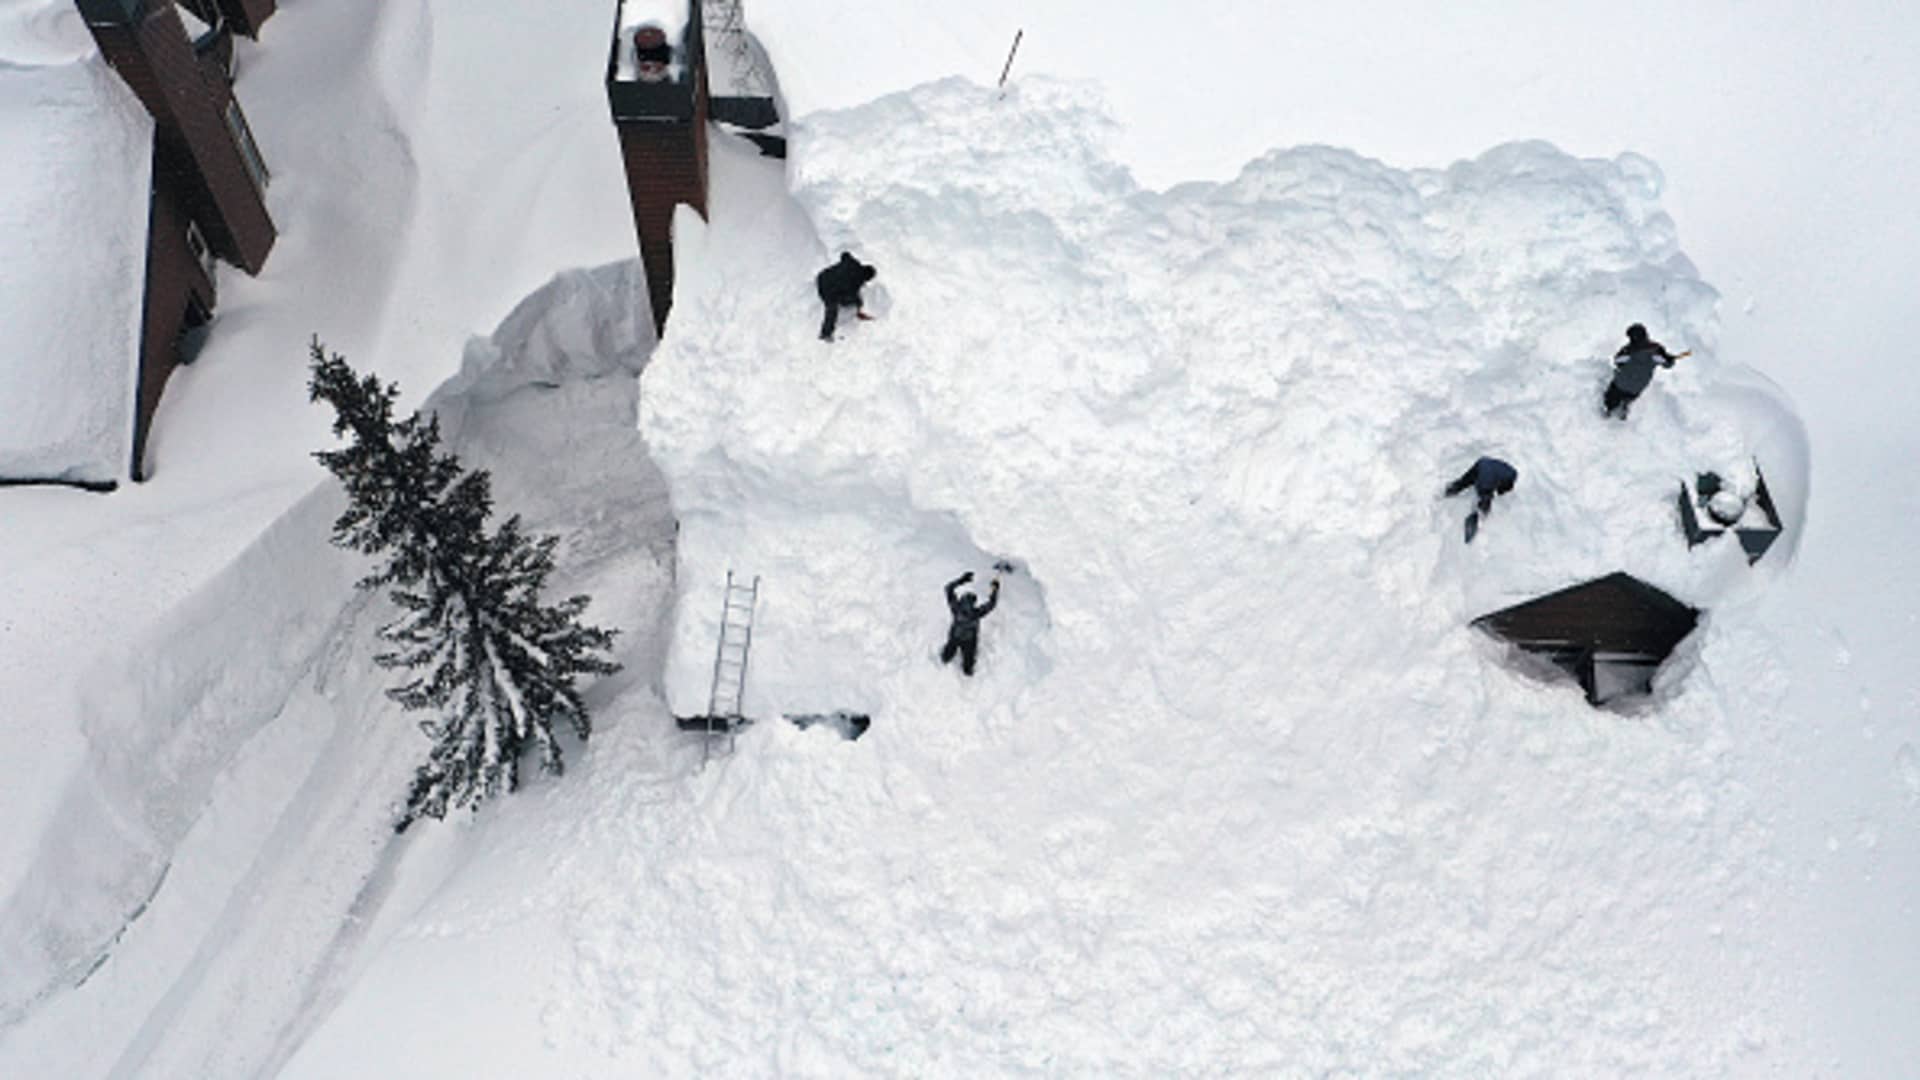 In an aerial view, workers remove snow from the roof of a condominium complex in the Sierra Nevada mountains, amid snow piled up from new and past storms, after yet another storm system brought heavy snowfall further raising the snowpack on March 29, 2023 in Mammoth Lakes, California. 